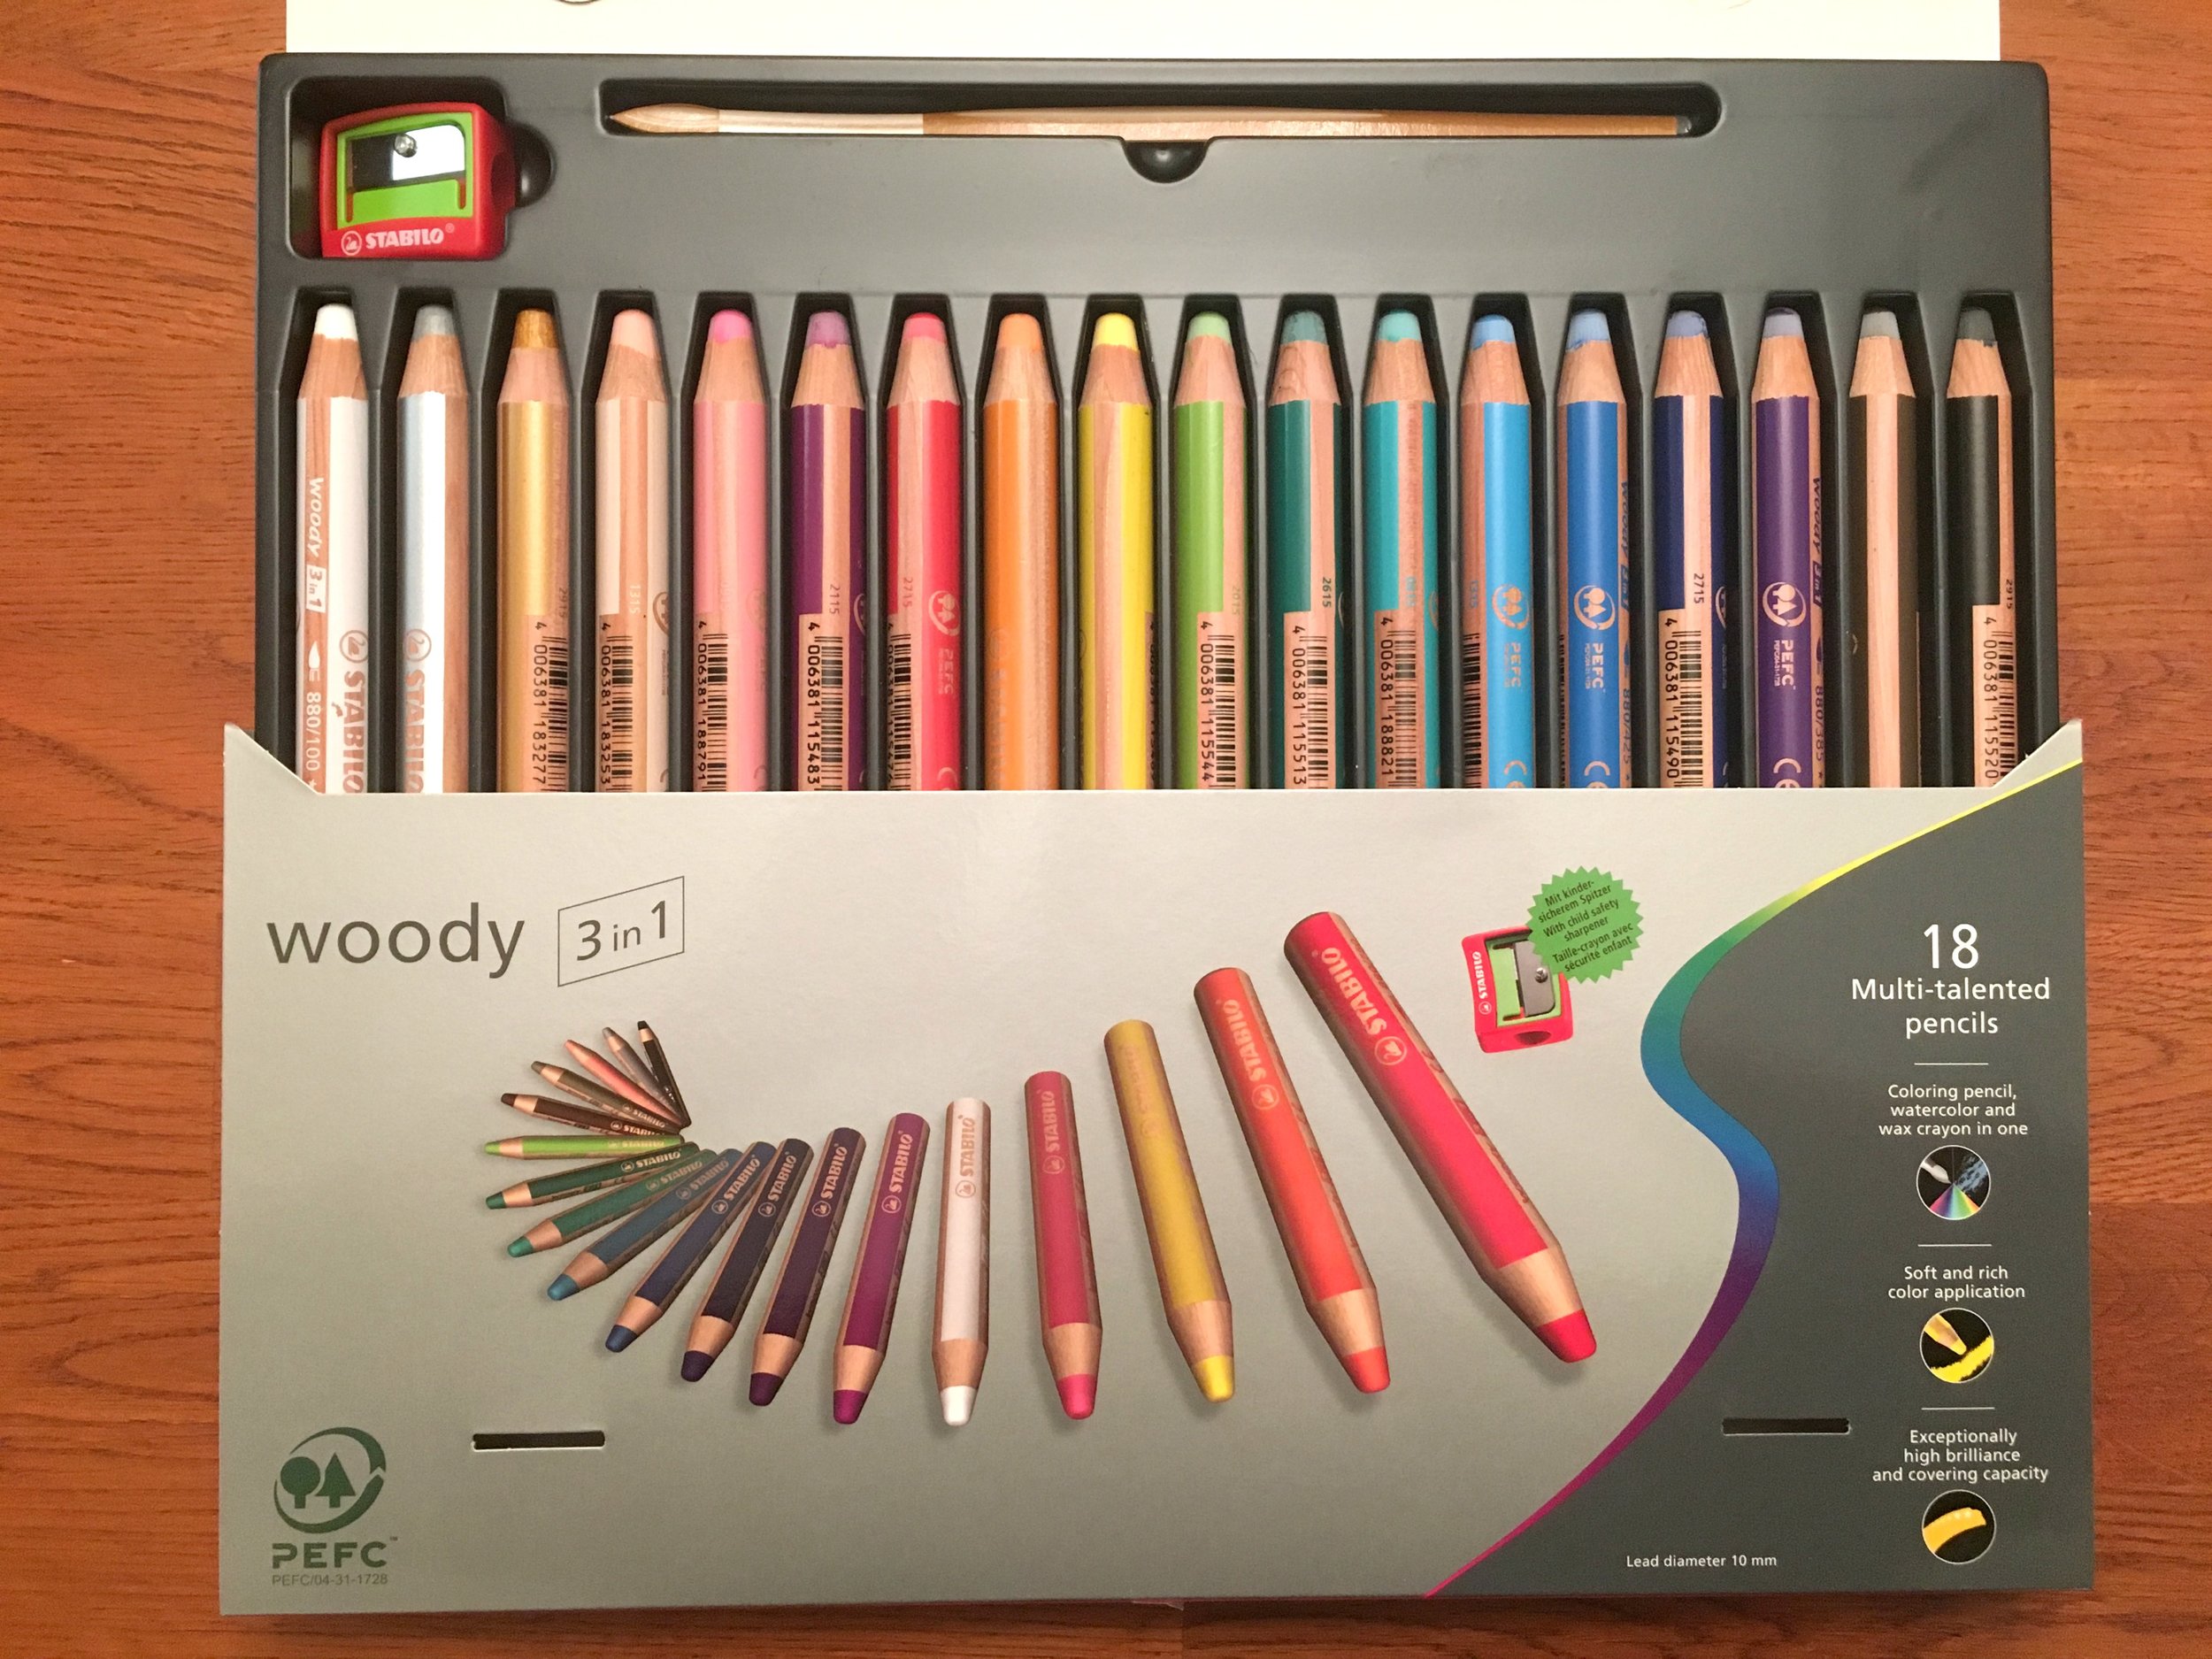 18 10 STABILO Woody 3in1 Thick Colouring Pencils Wax Crayons Watercolour6 